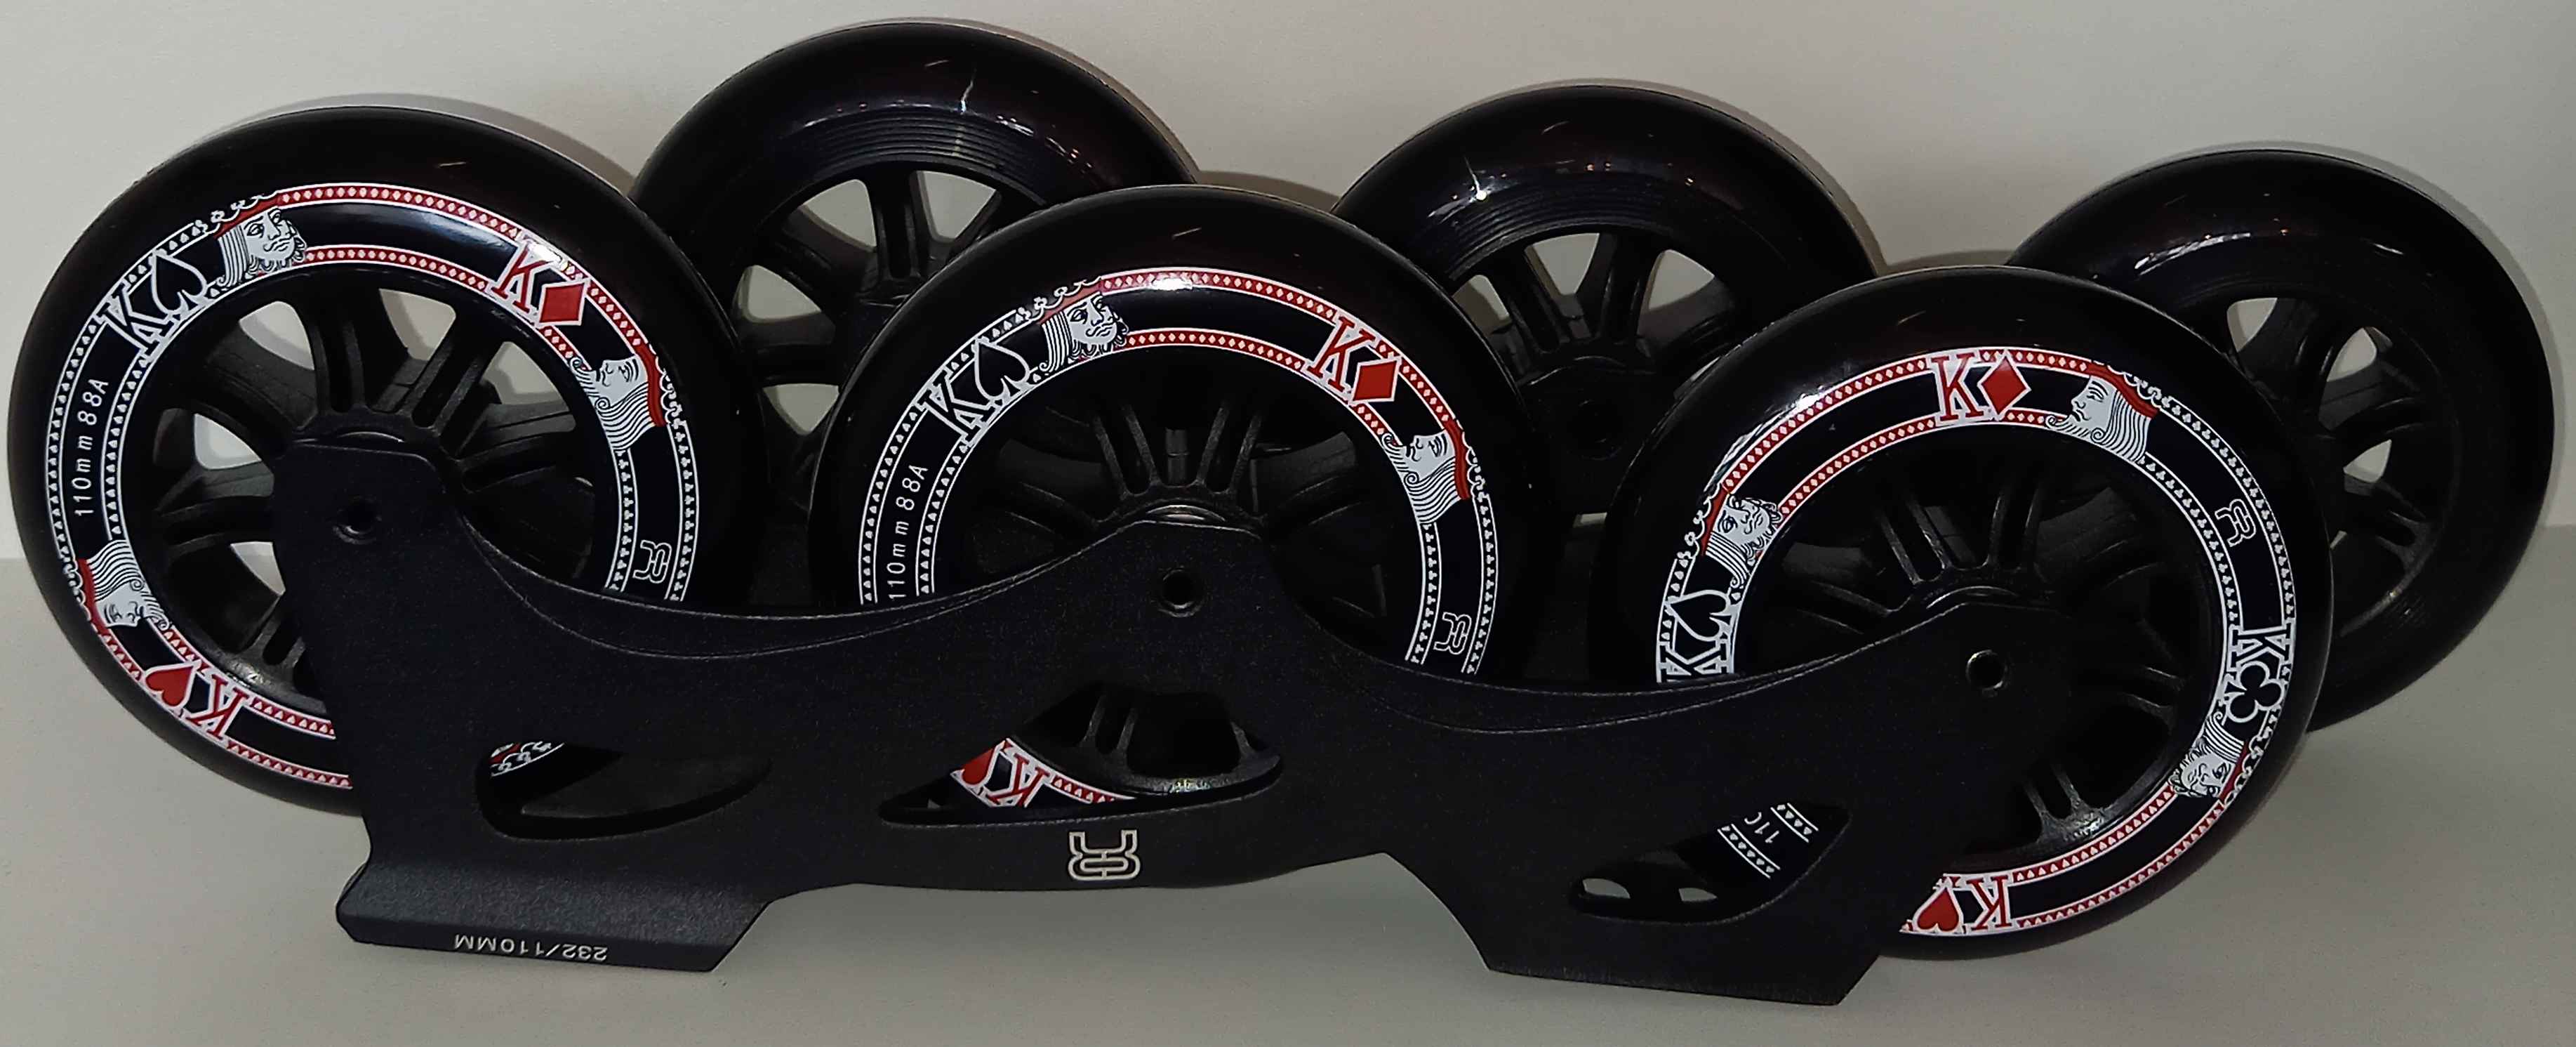 a pair of FR3 310 full frame and wheel set